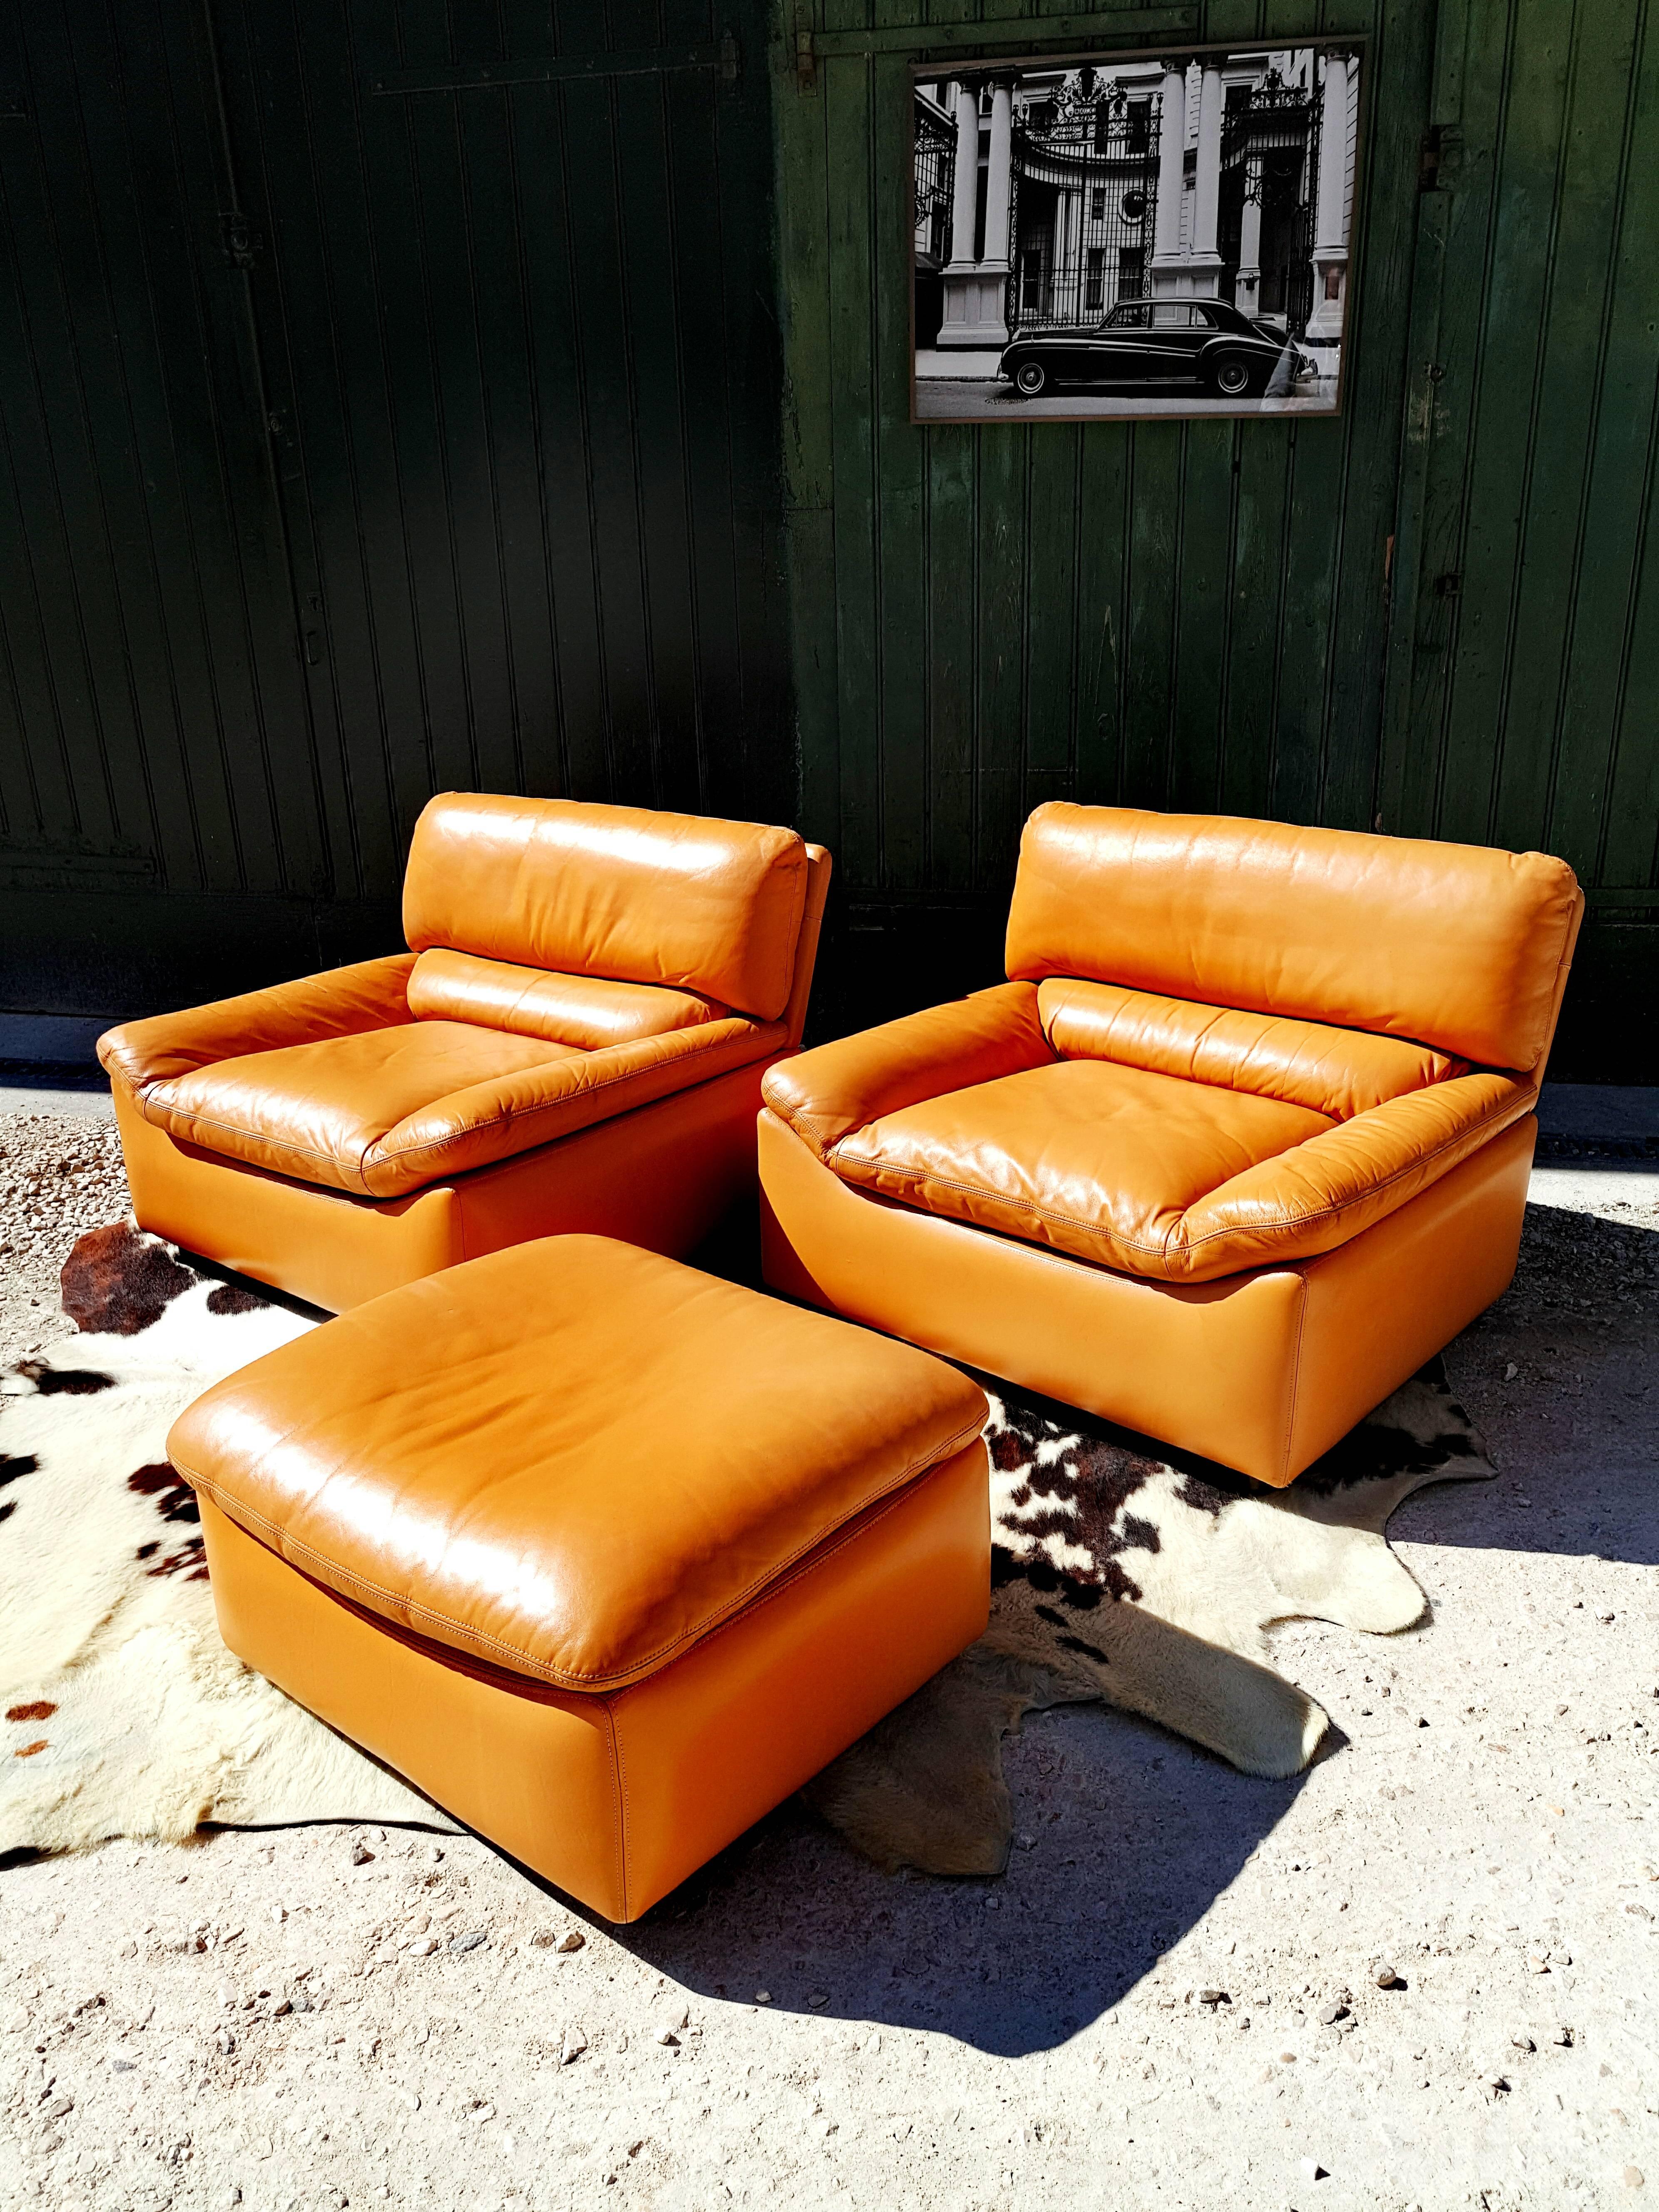 Pair of lounge chairs, in tan leather, with is own ottoman by Anita Schmidt for Durlet furniture, Belgium, 1970s.
In perfect vintage condition, the Belgium manufacturer Durlet can be compared to brands like De Sede and Wittman. Al known for their